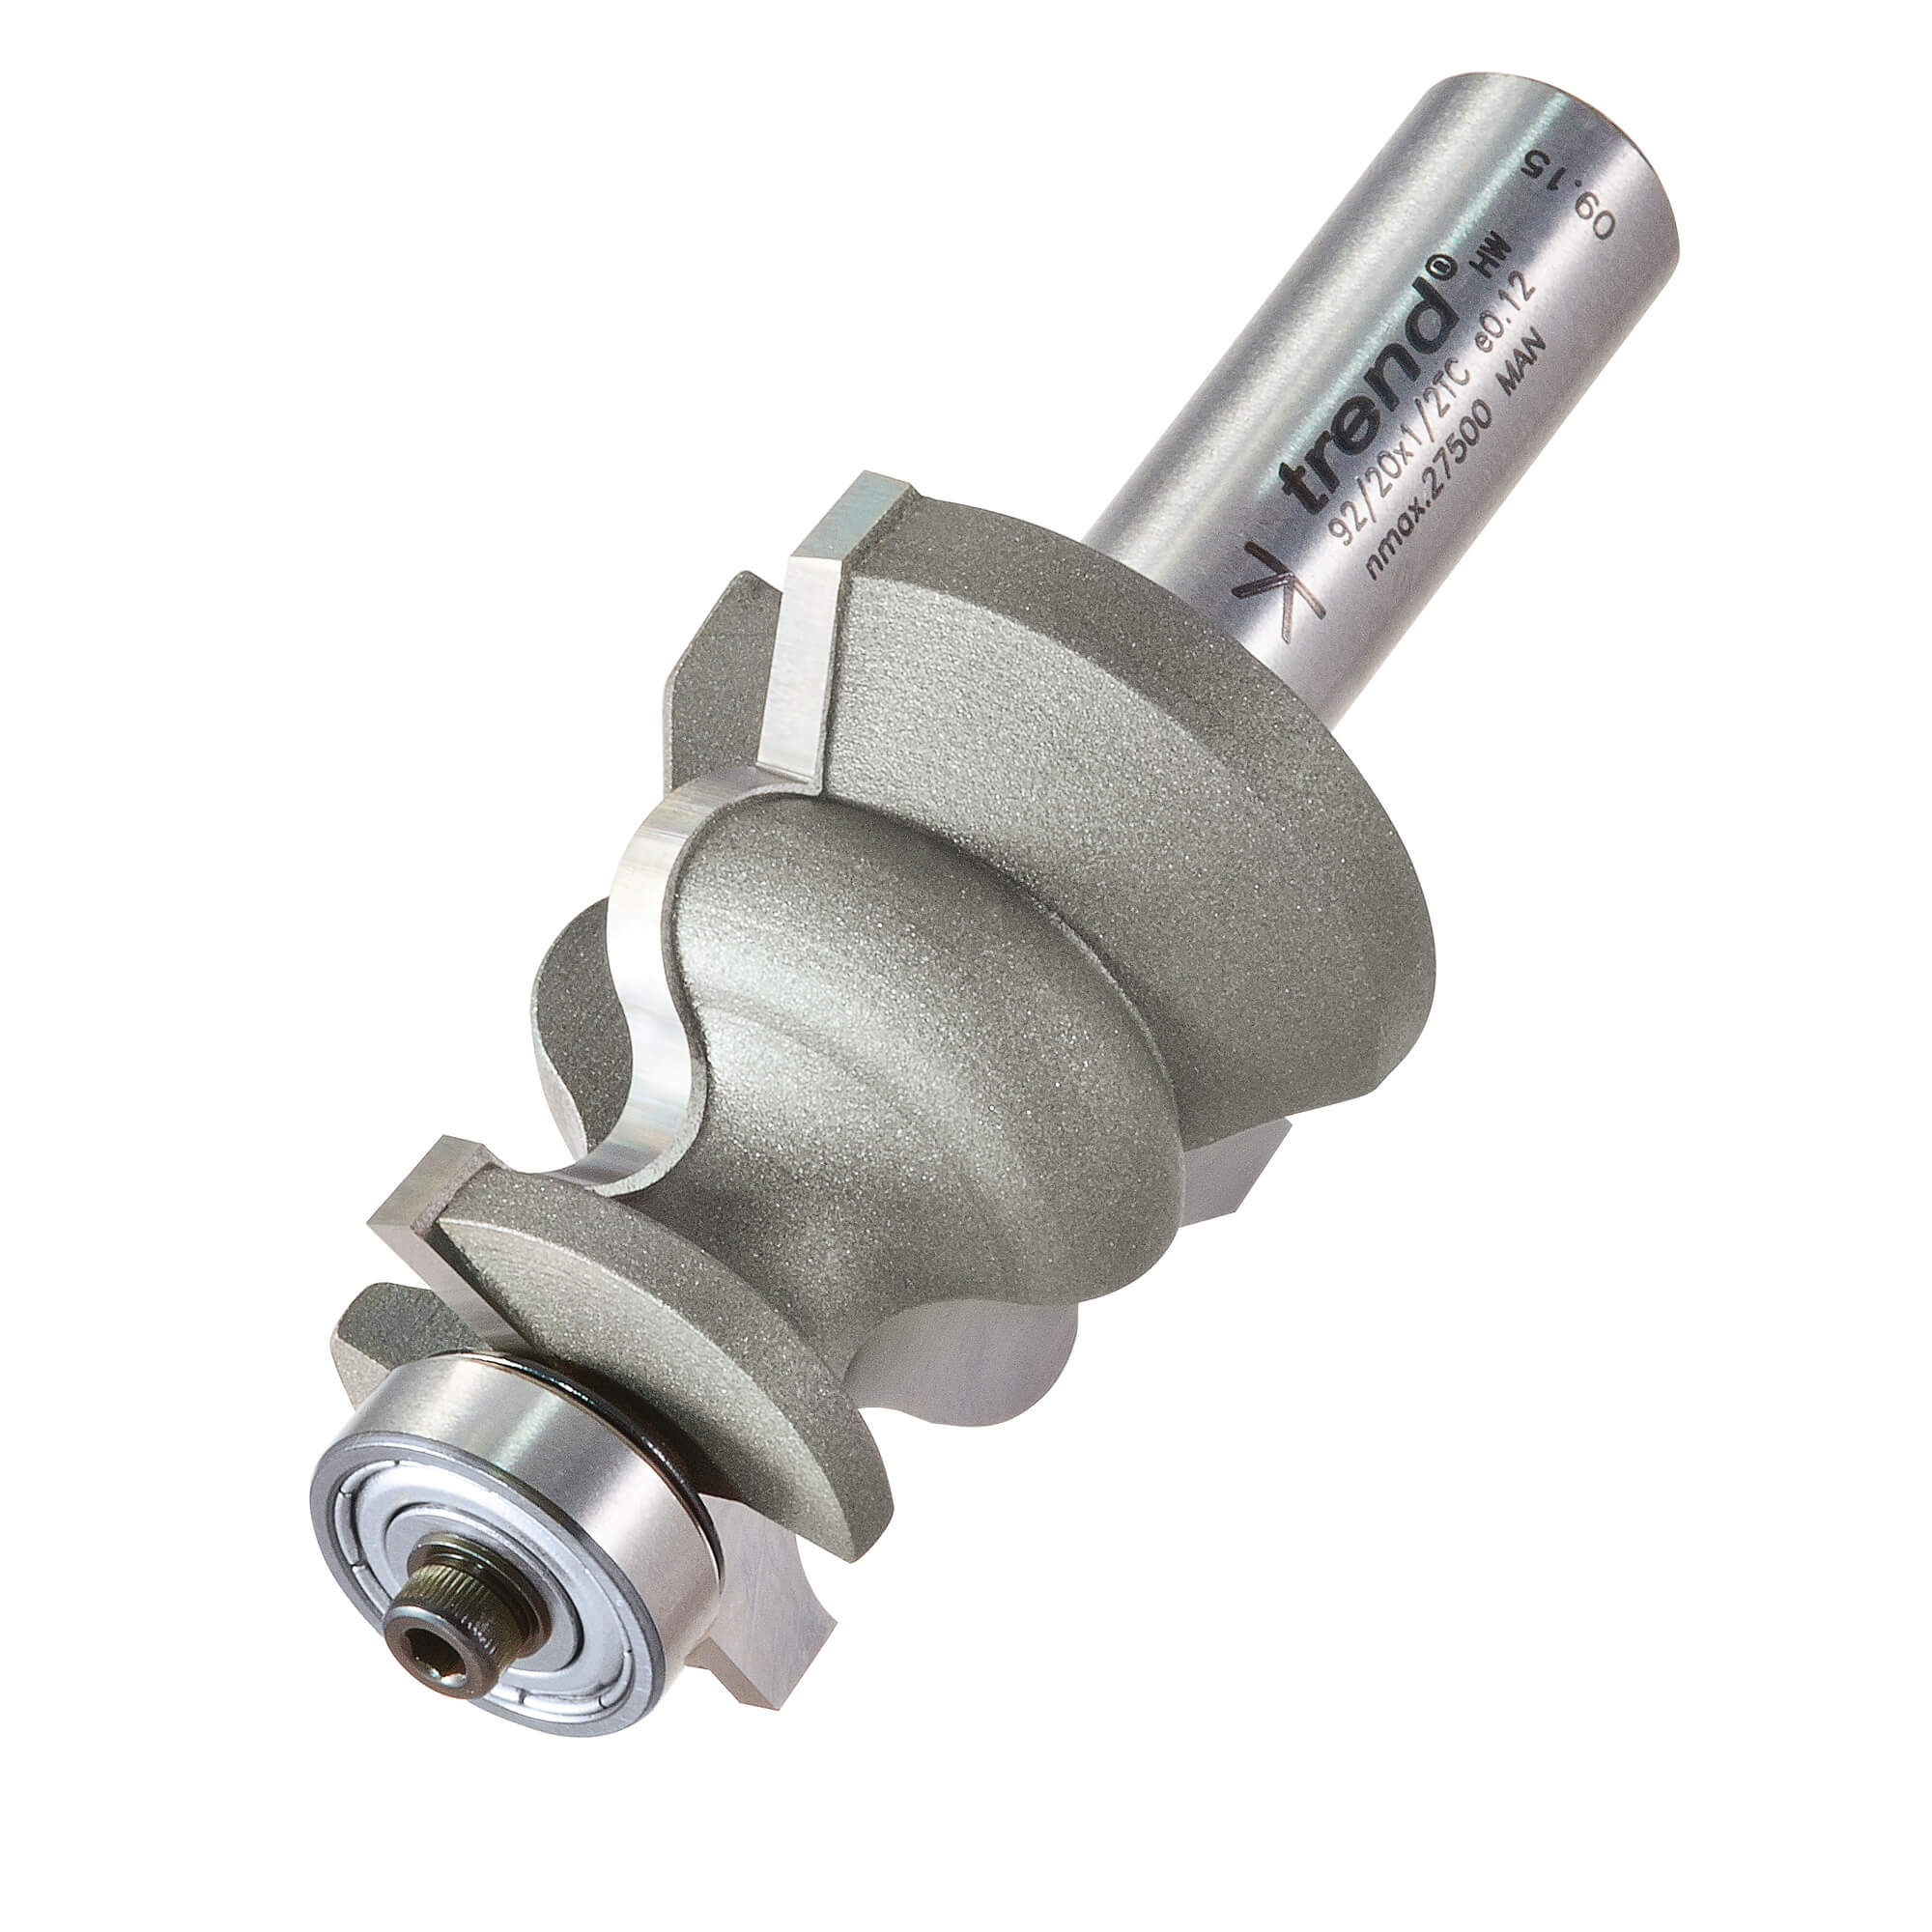 Image of Trend Bearing Guided Decorative Bead Router Cutter 35mm 38mm 1/2"